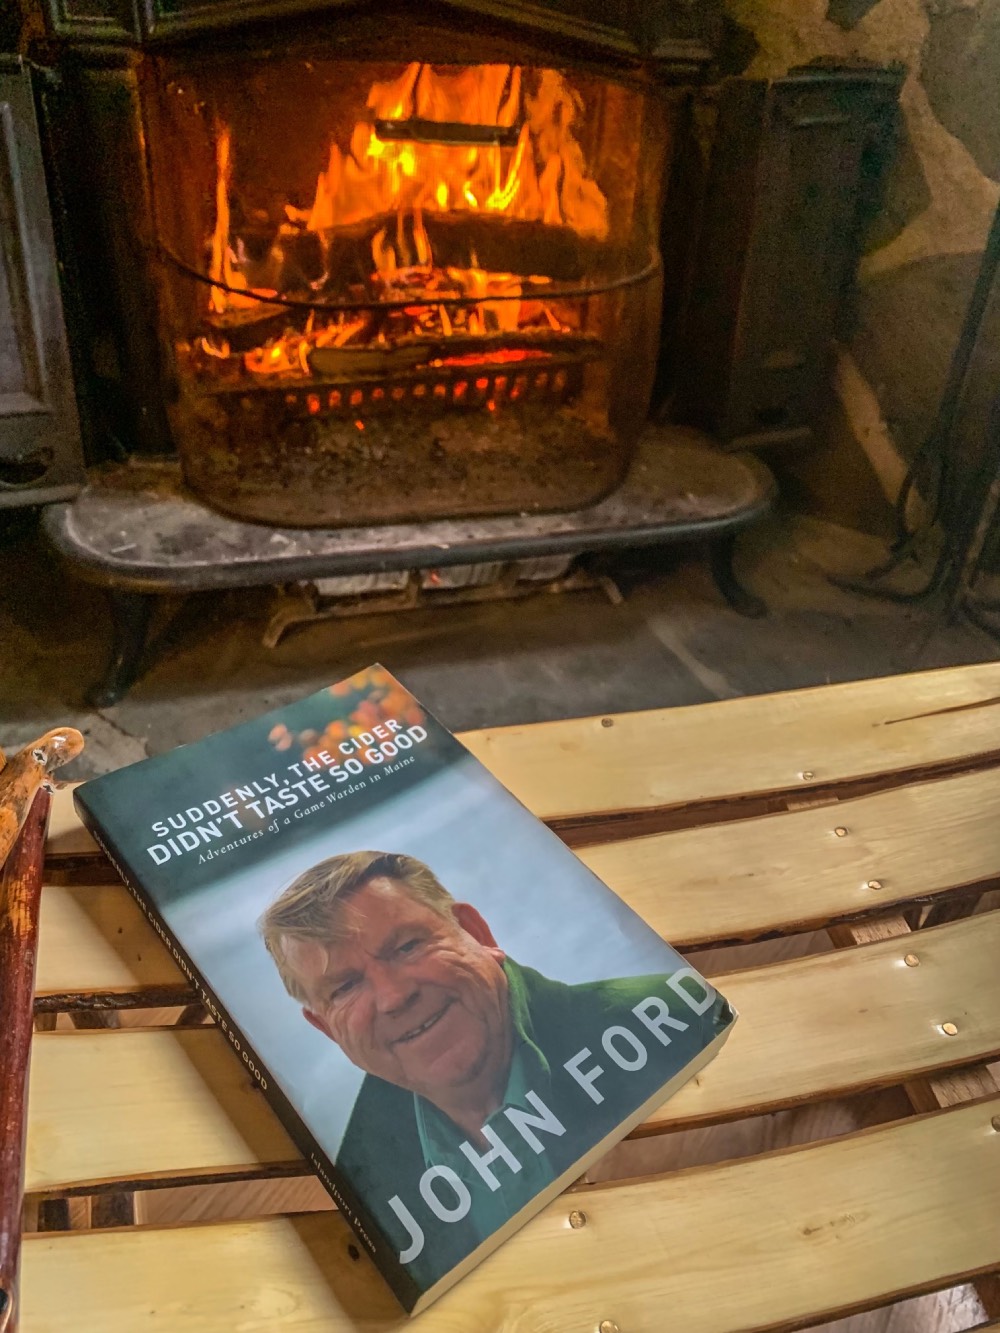 the book sits in front of a cabin's fireplace